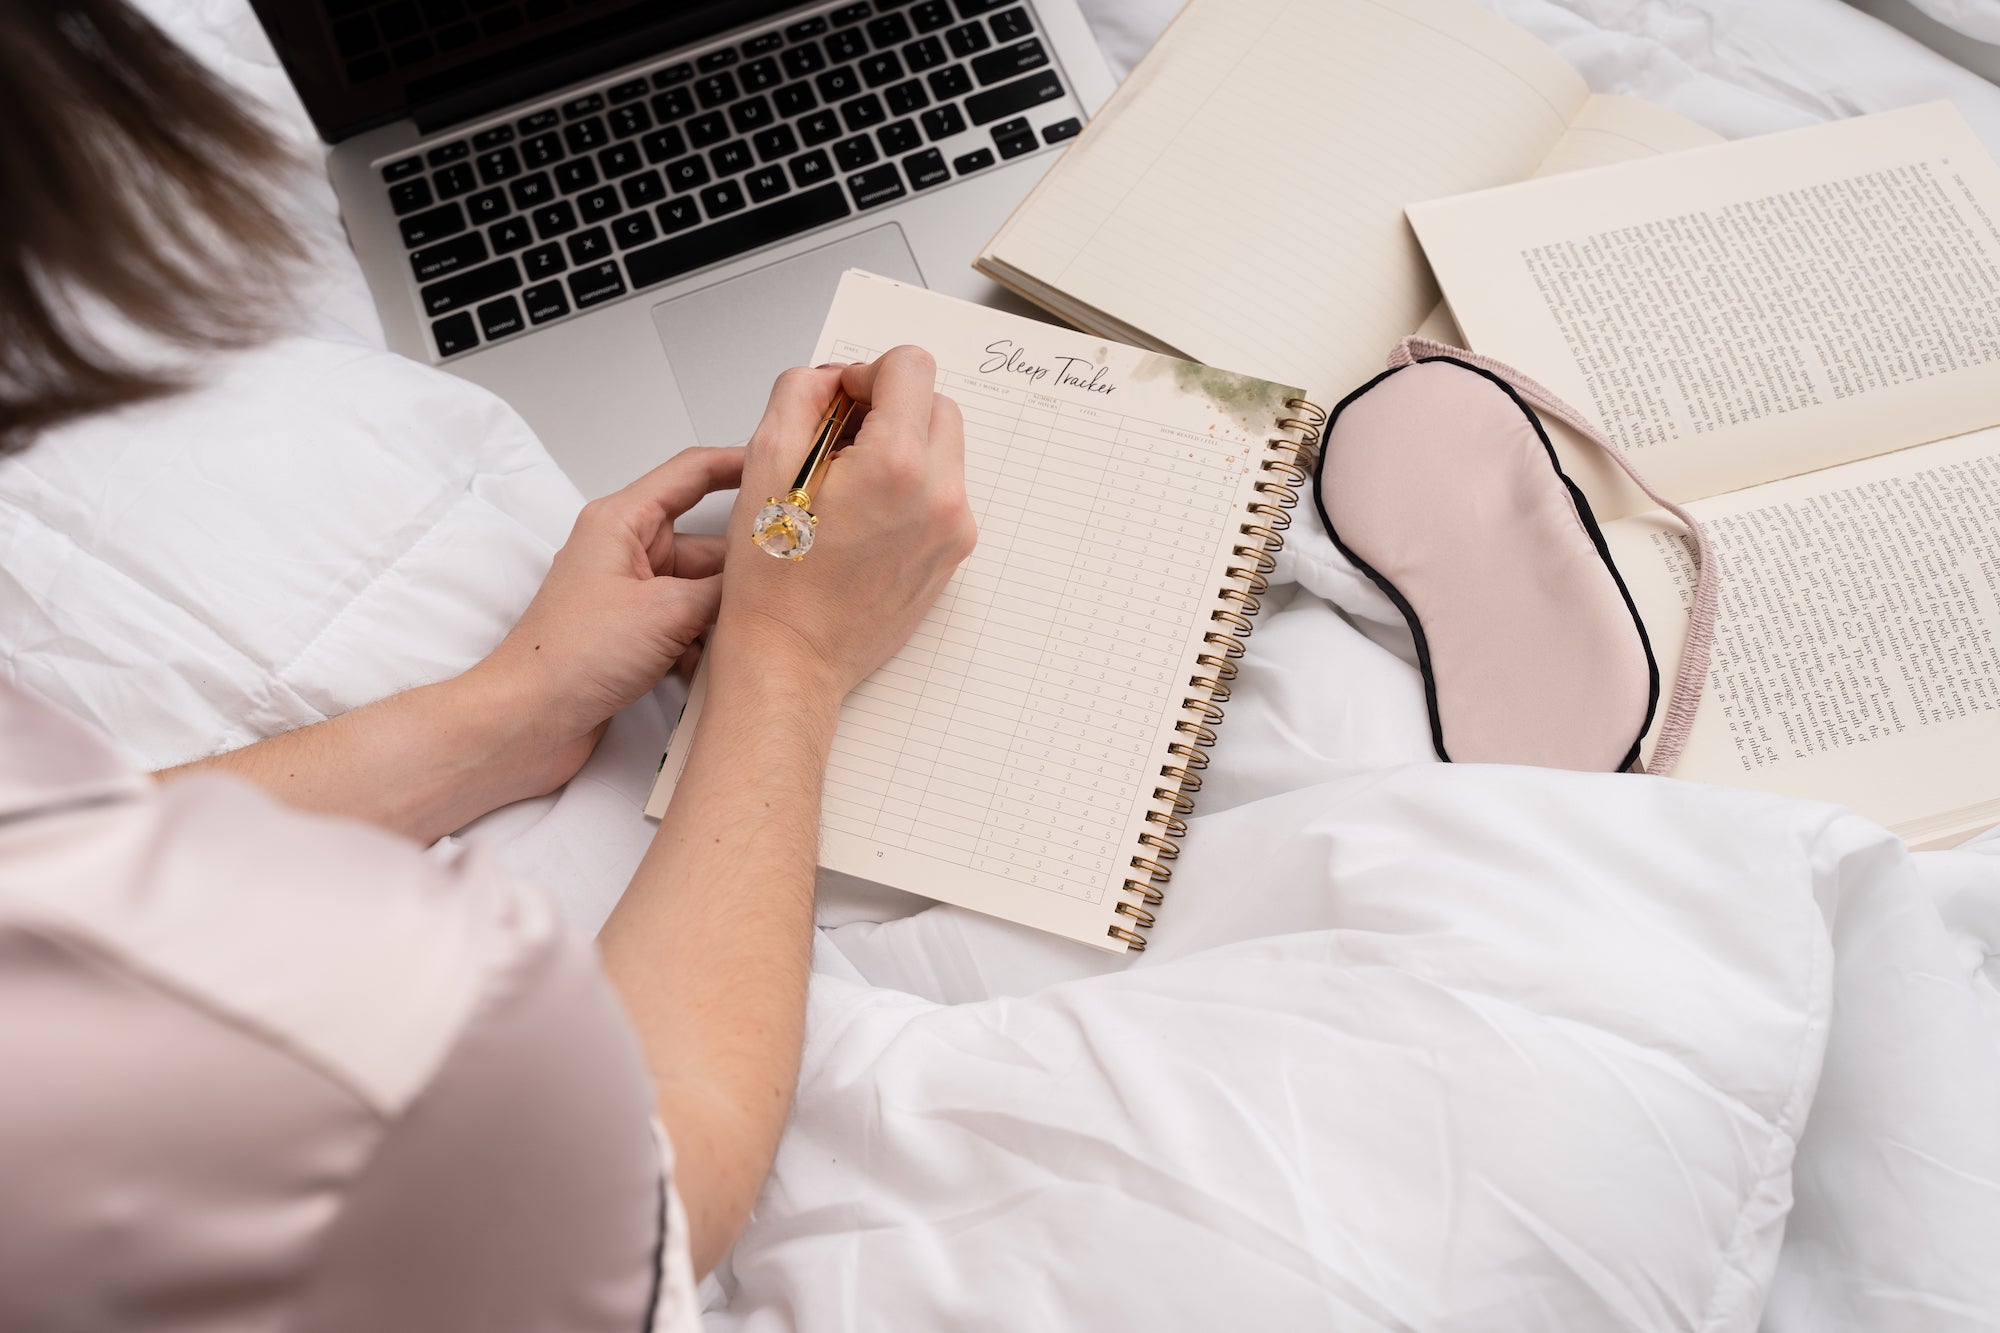 17 Therapists Share Their Best Tips For How To Keep a Journal (You'll Want To Write These Down!)